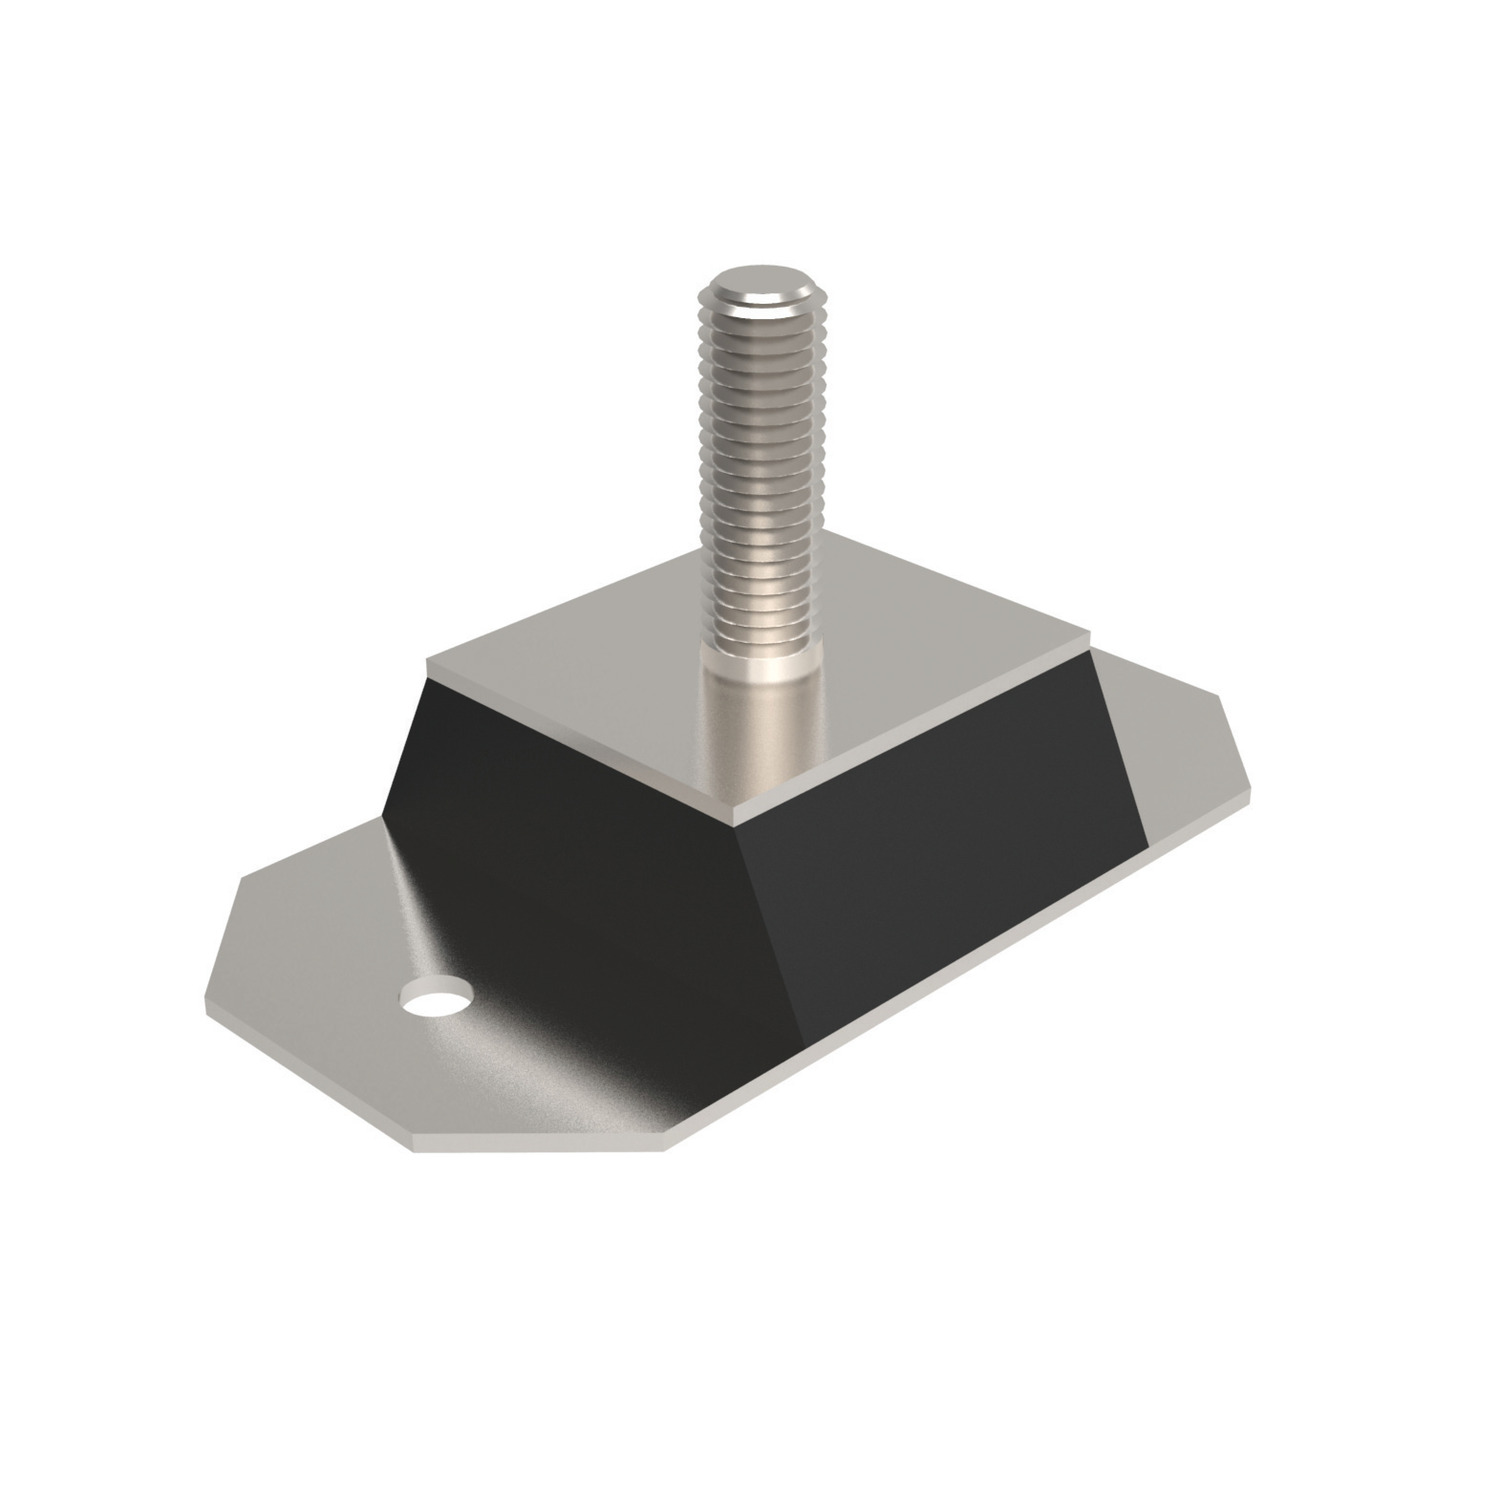 Anti-vibration Mounts Rectangular anti-vibration mounts used to support machine tools and packaging machinery. Provides vibration isolation for frequencies higher than 20Hz.